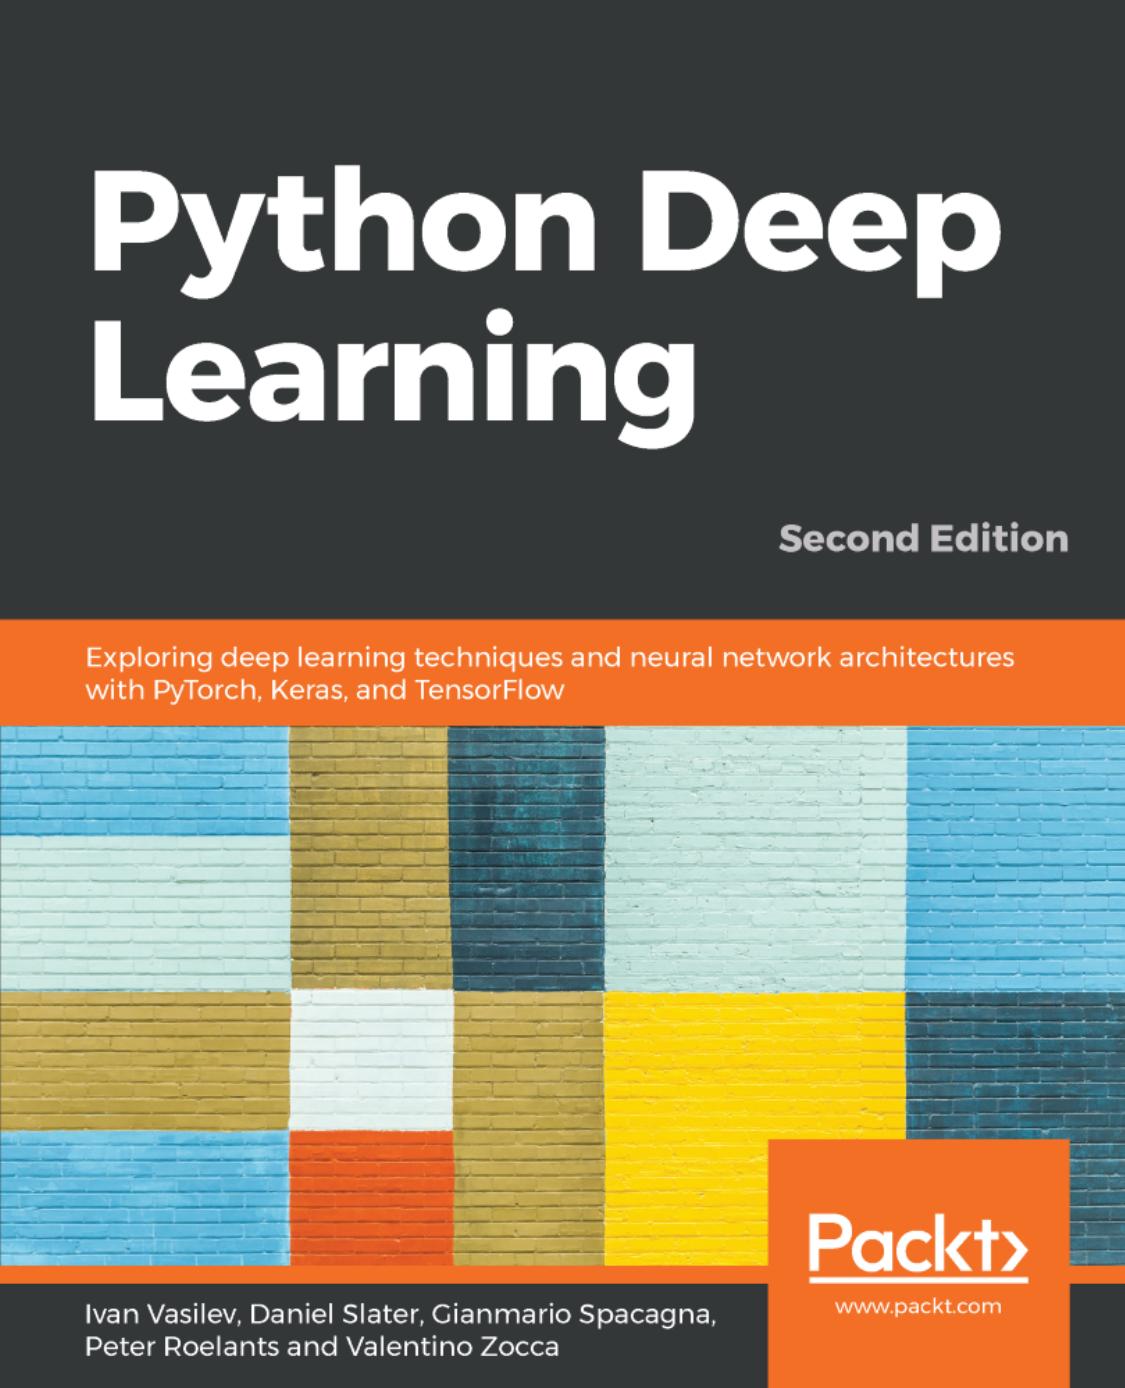 Python Deep Learning  Exploring deep learning techniques, neural network architectures and GANs with PyTorch, Keras and TensorFlow ( PDFDrive.com )